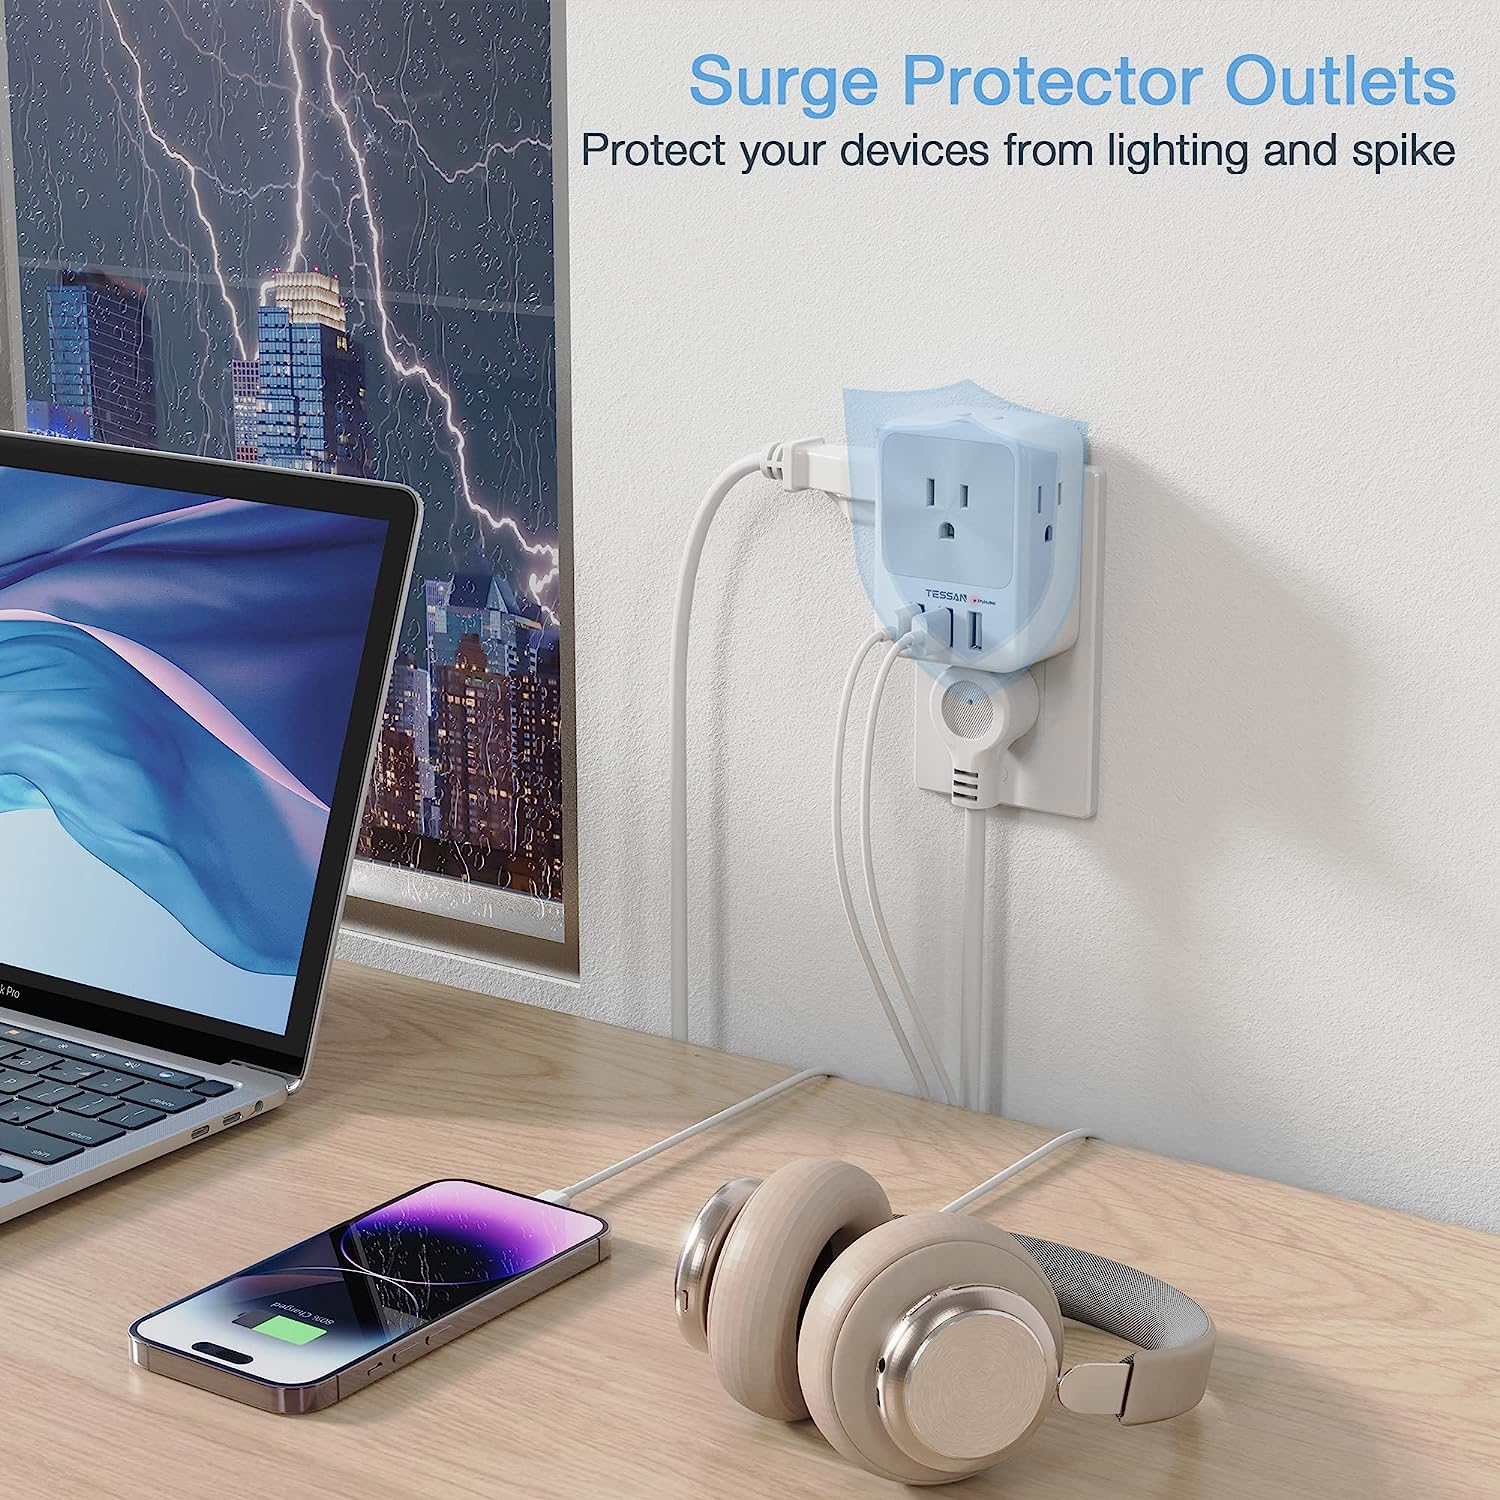 TESSAN 4 Electrical Outlet Extender Surge Protector with 3 USB Wall Charger